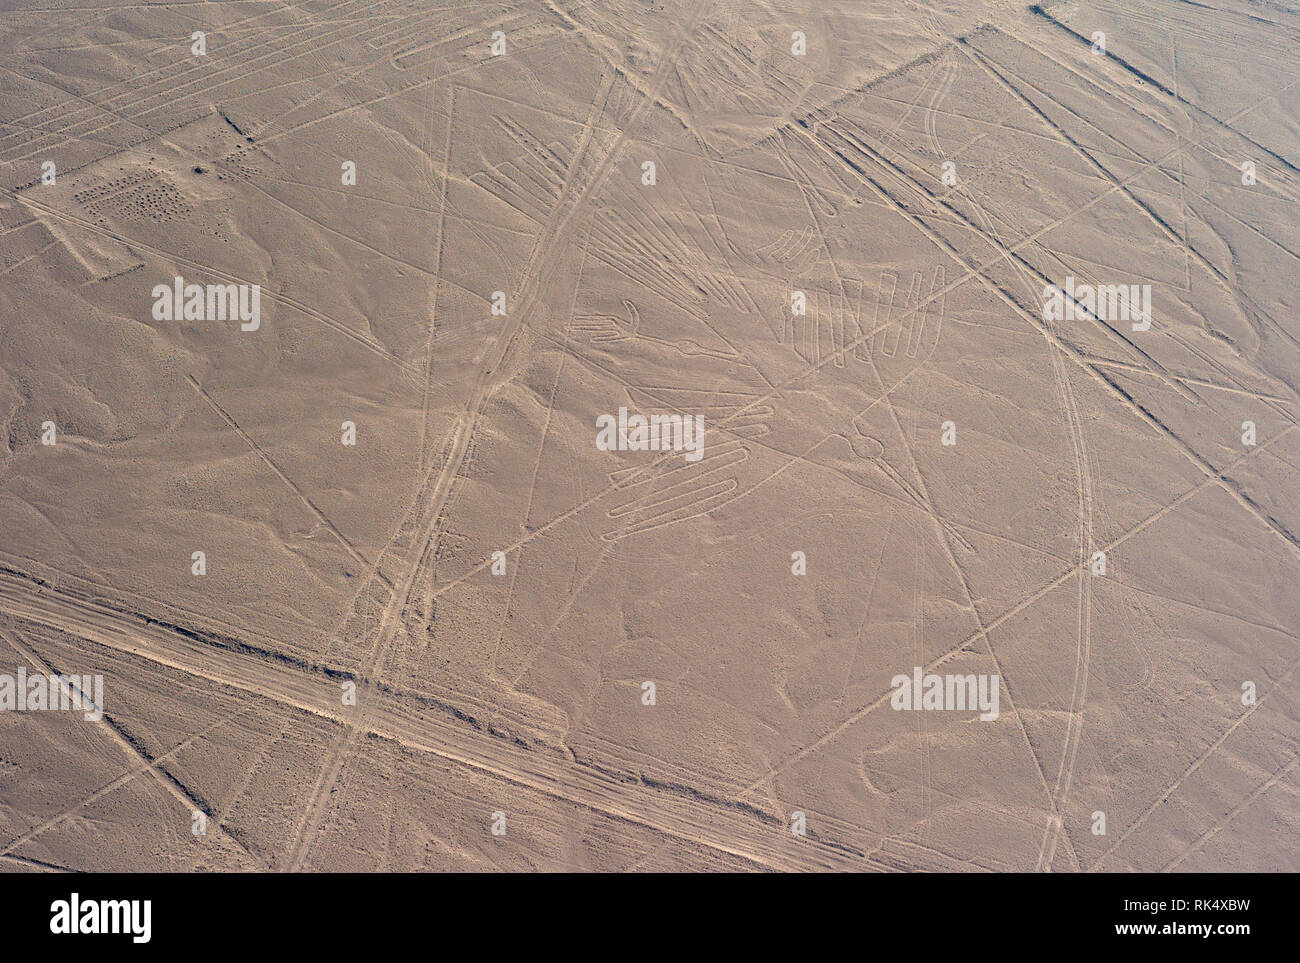 Aerial photo of the Mysterious the Condor Geoglyph, Nazca Lines Unesco World Heritage Site, Peru Stock Photo